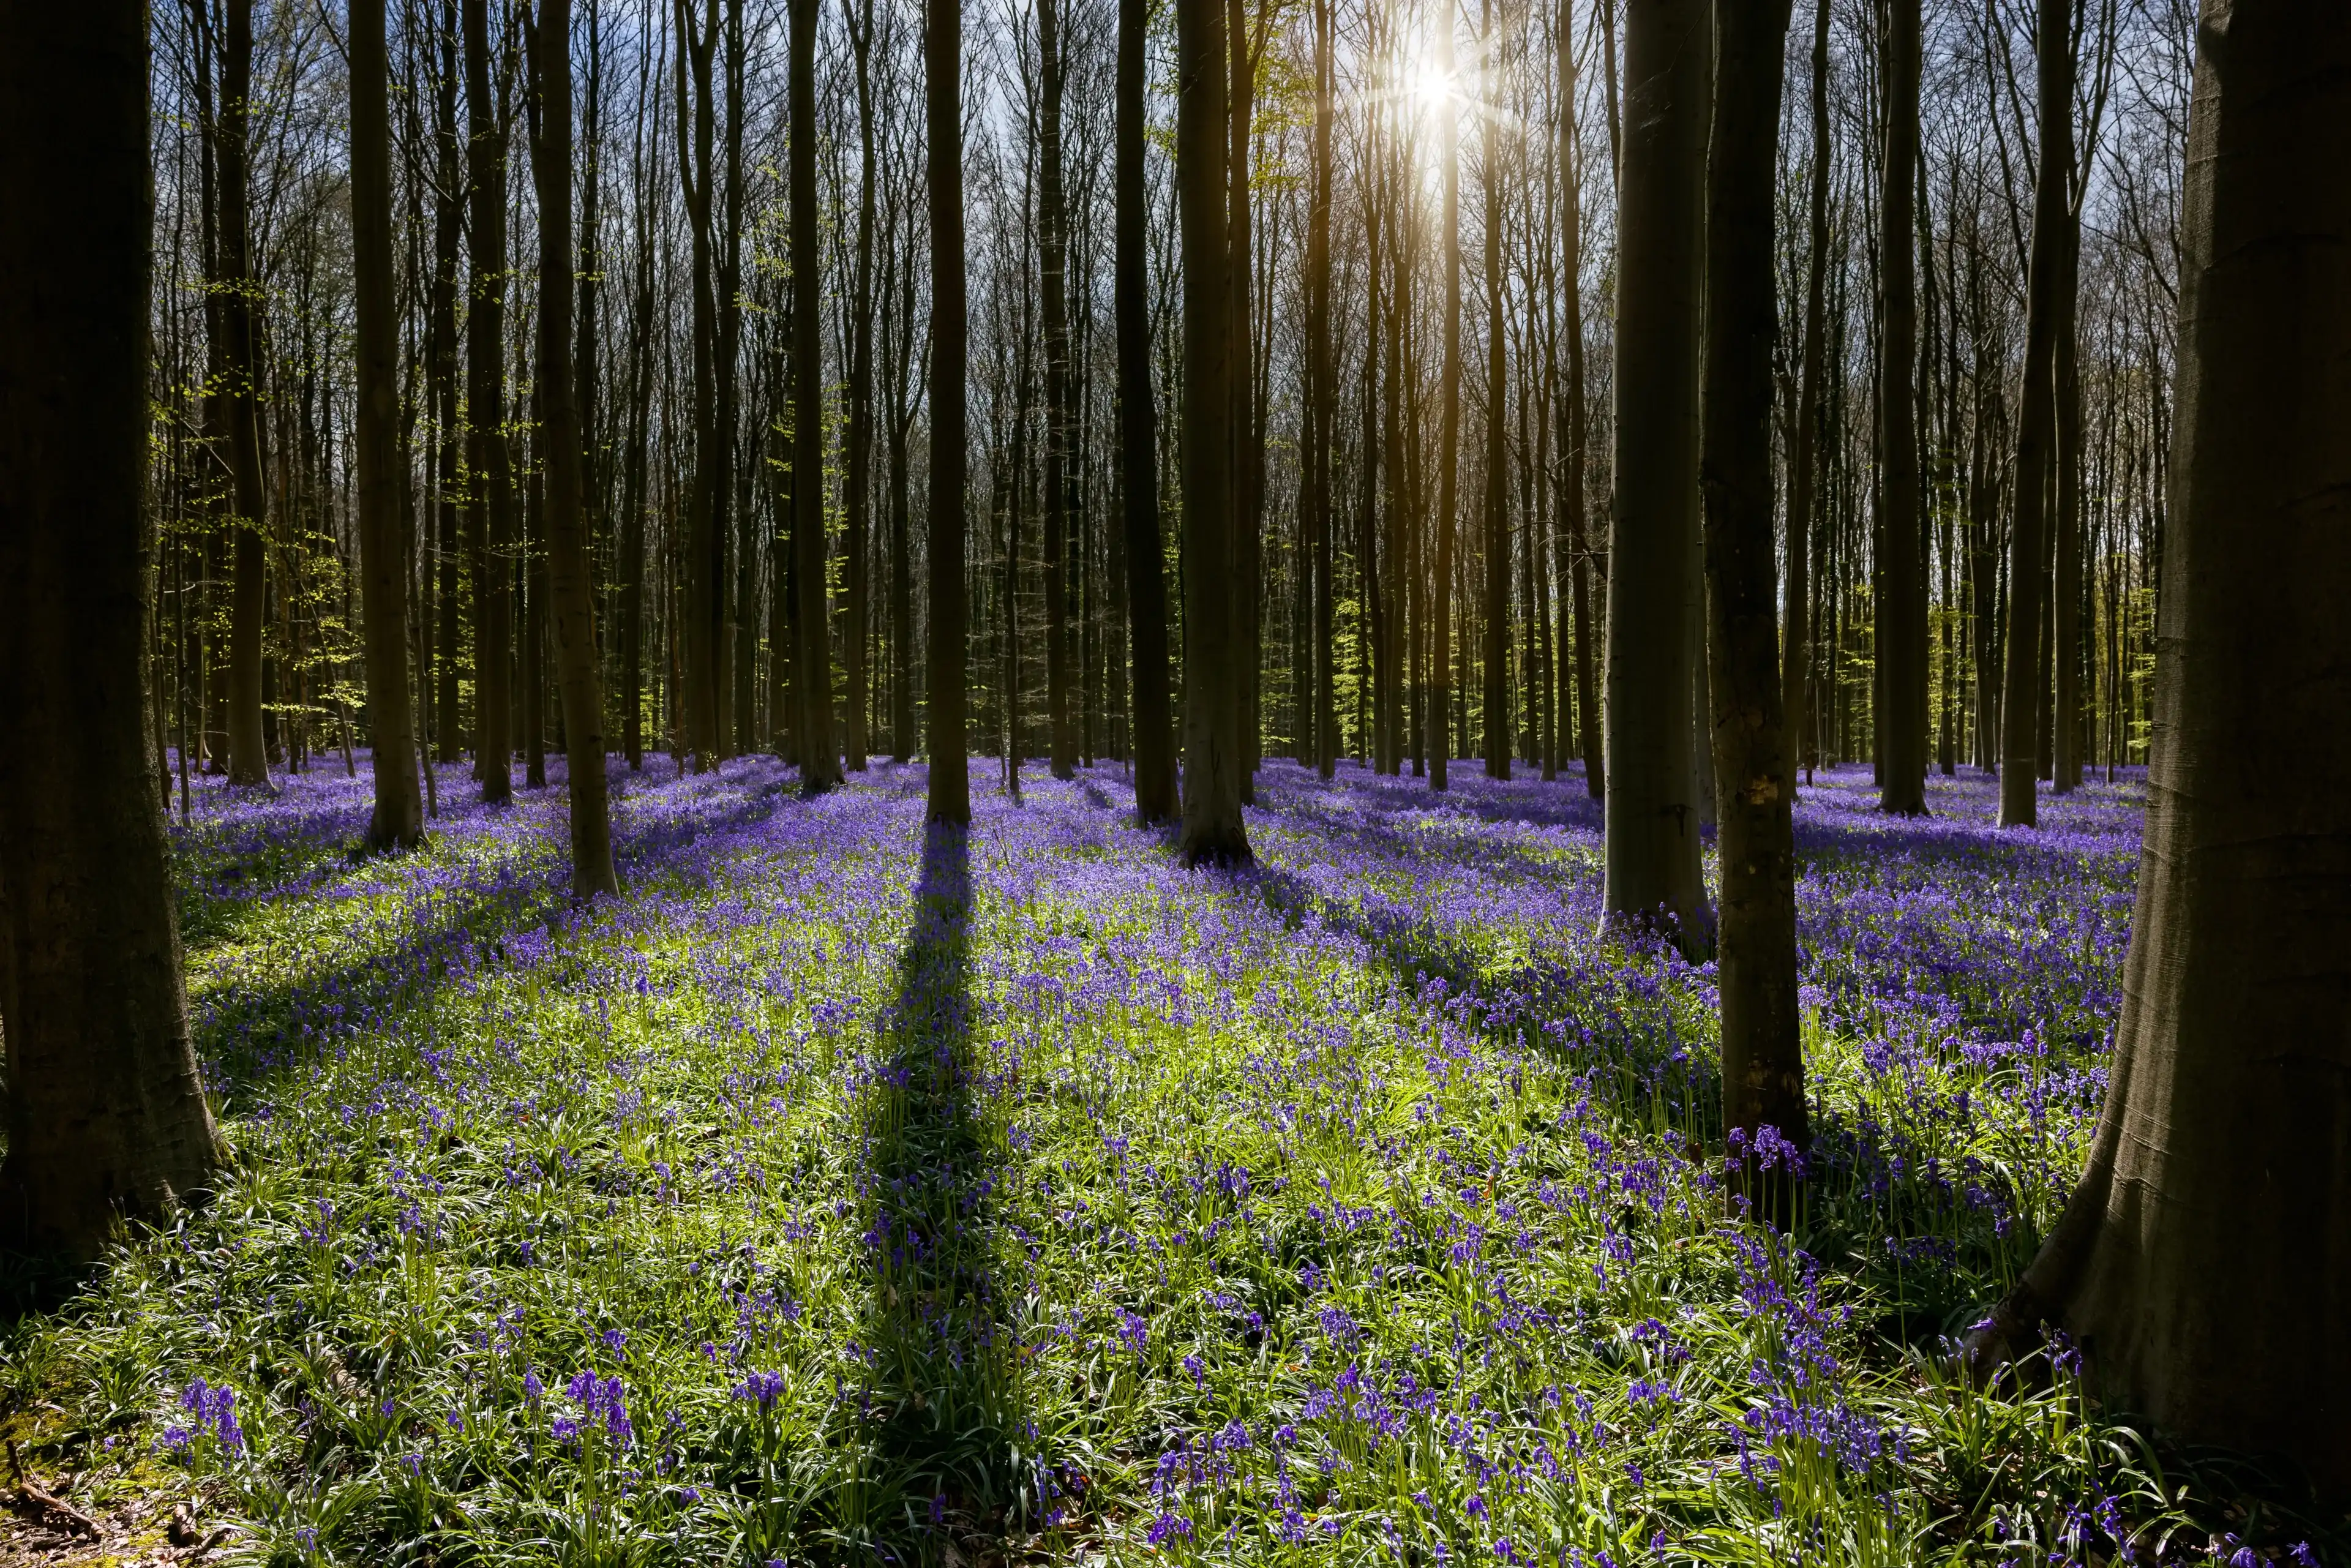 The hyacinth wildflowers in the Hallerbos forest near Brussels in Belgium are only in full bloom during one week in Springtime. Visitors are not allowed to leave the main path to protect the flowers